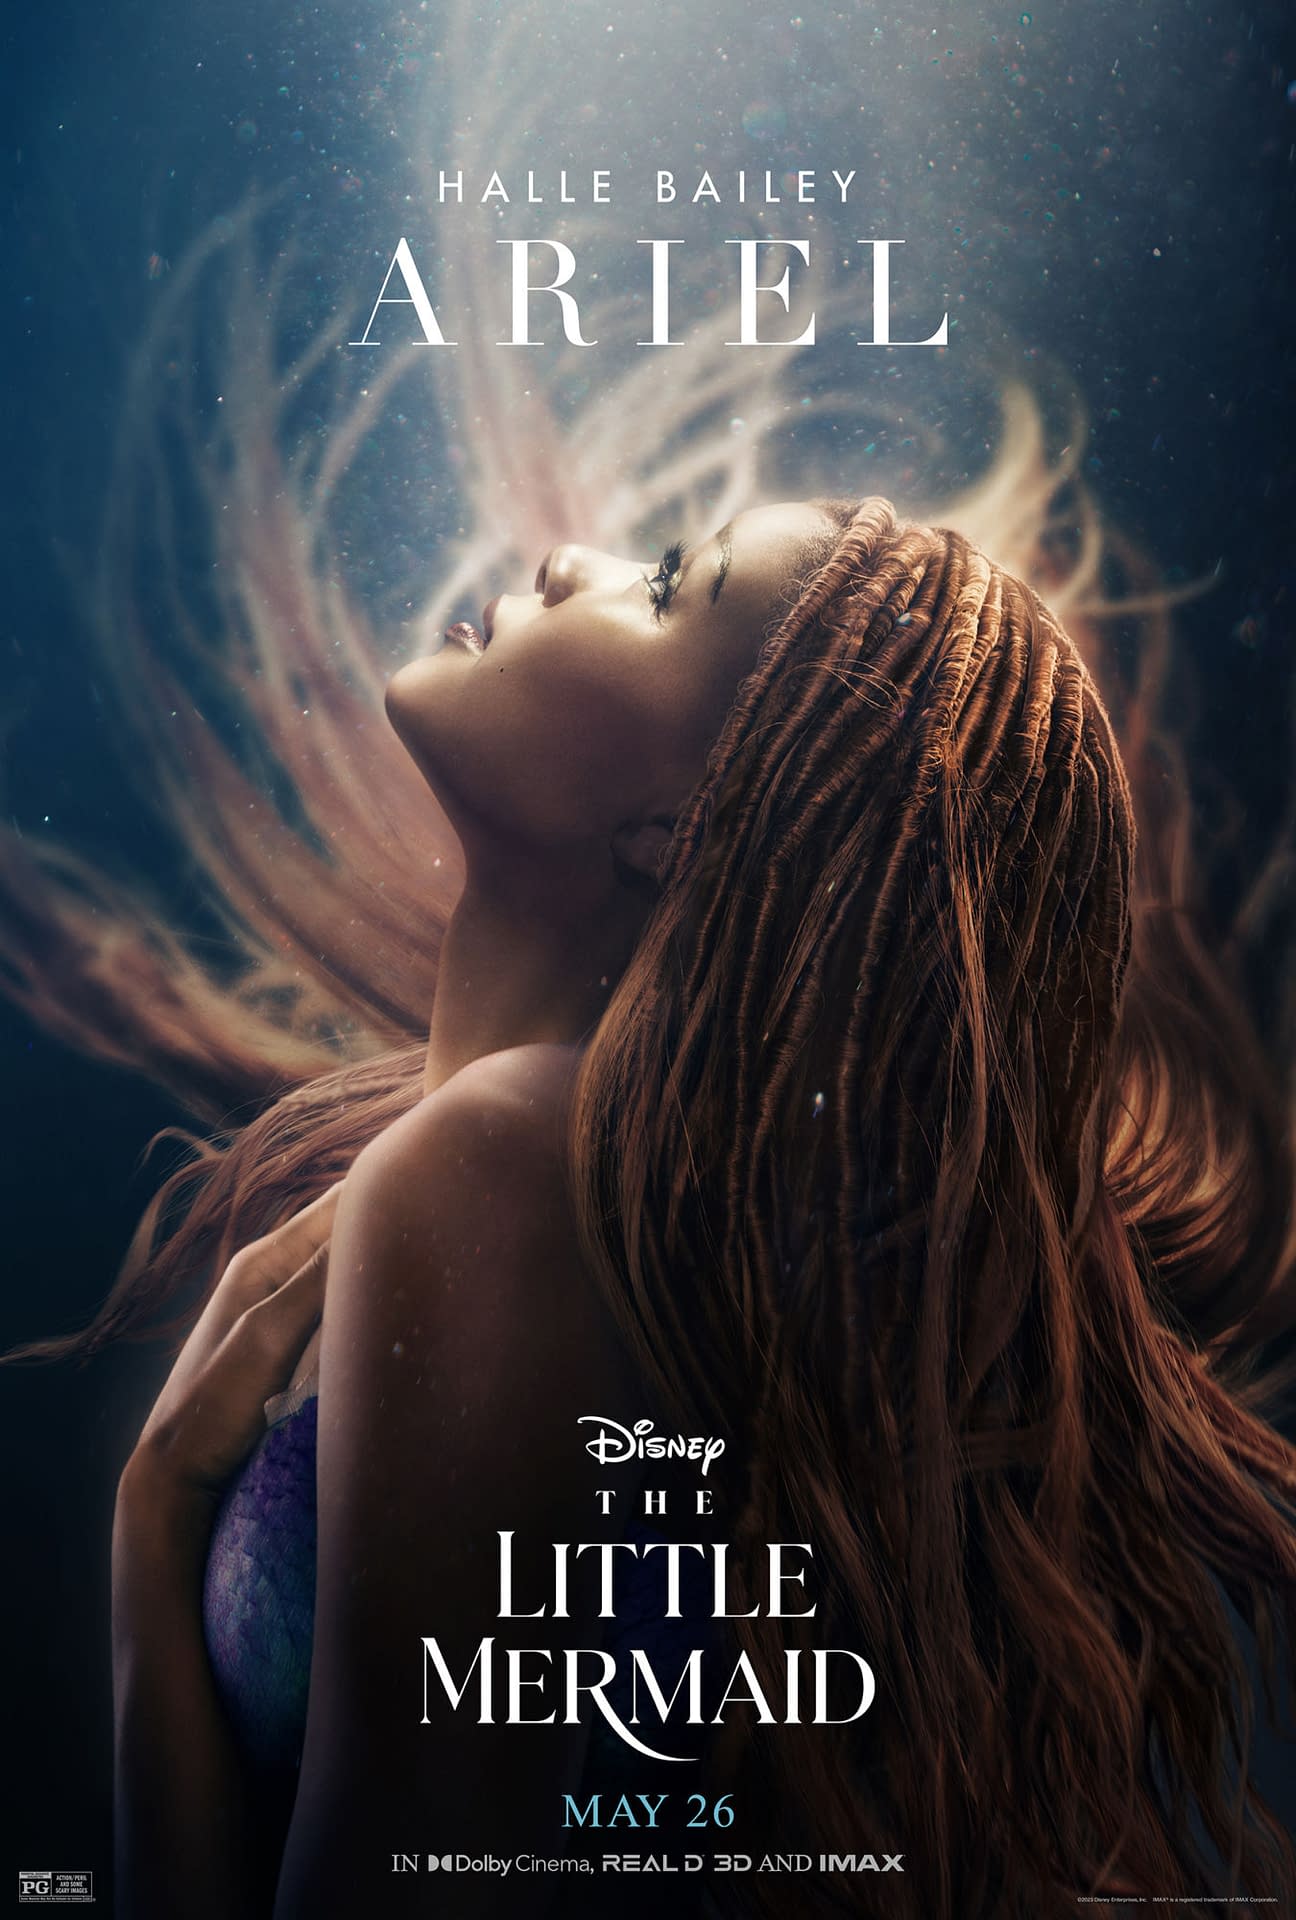 The Little Mermaid Director On Halle Bailey Earning The Leading Role